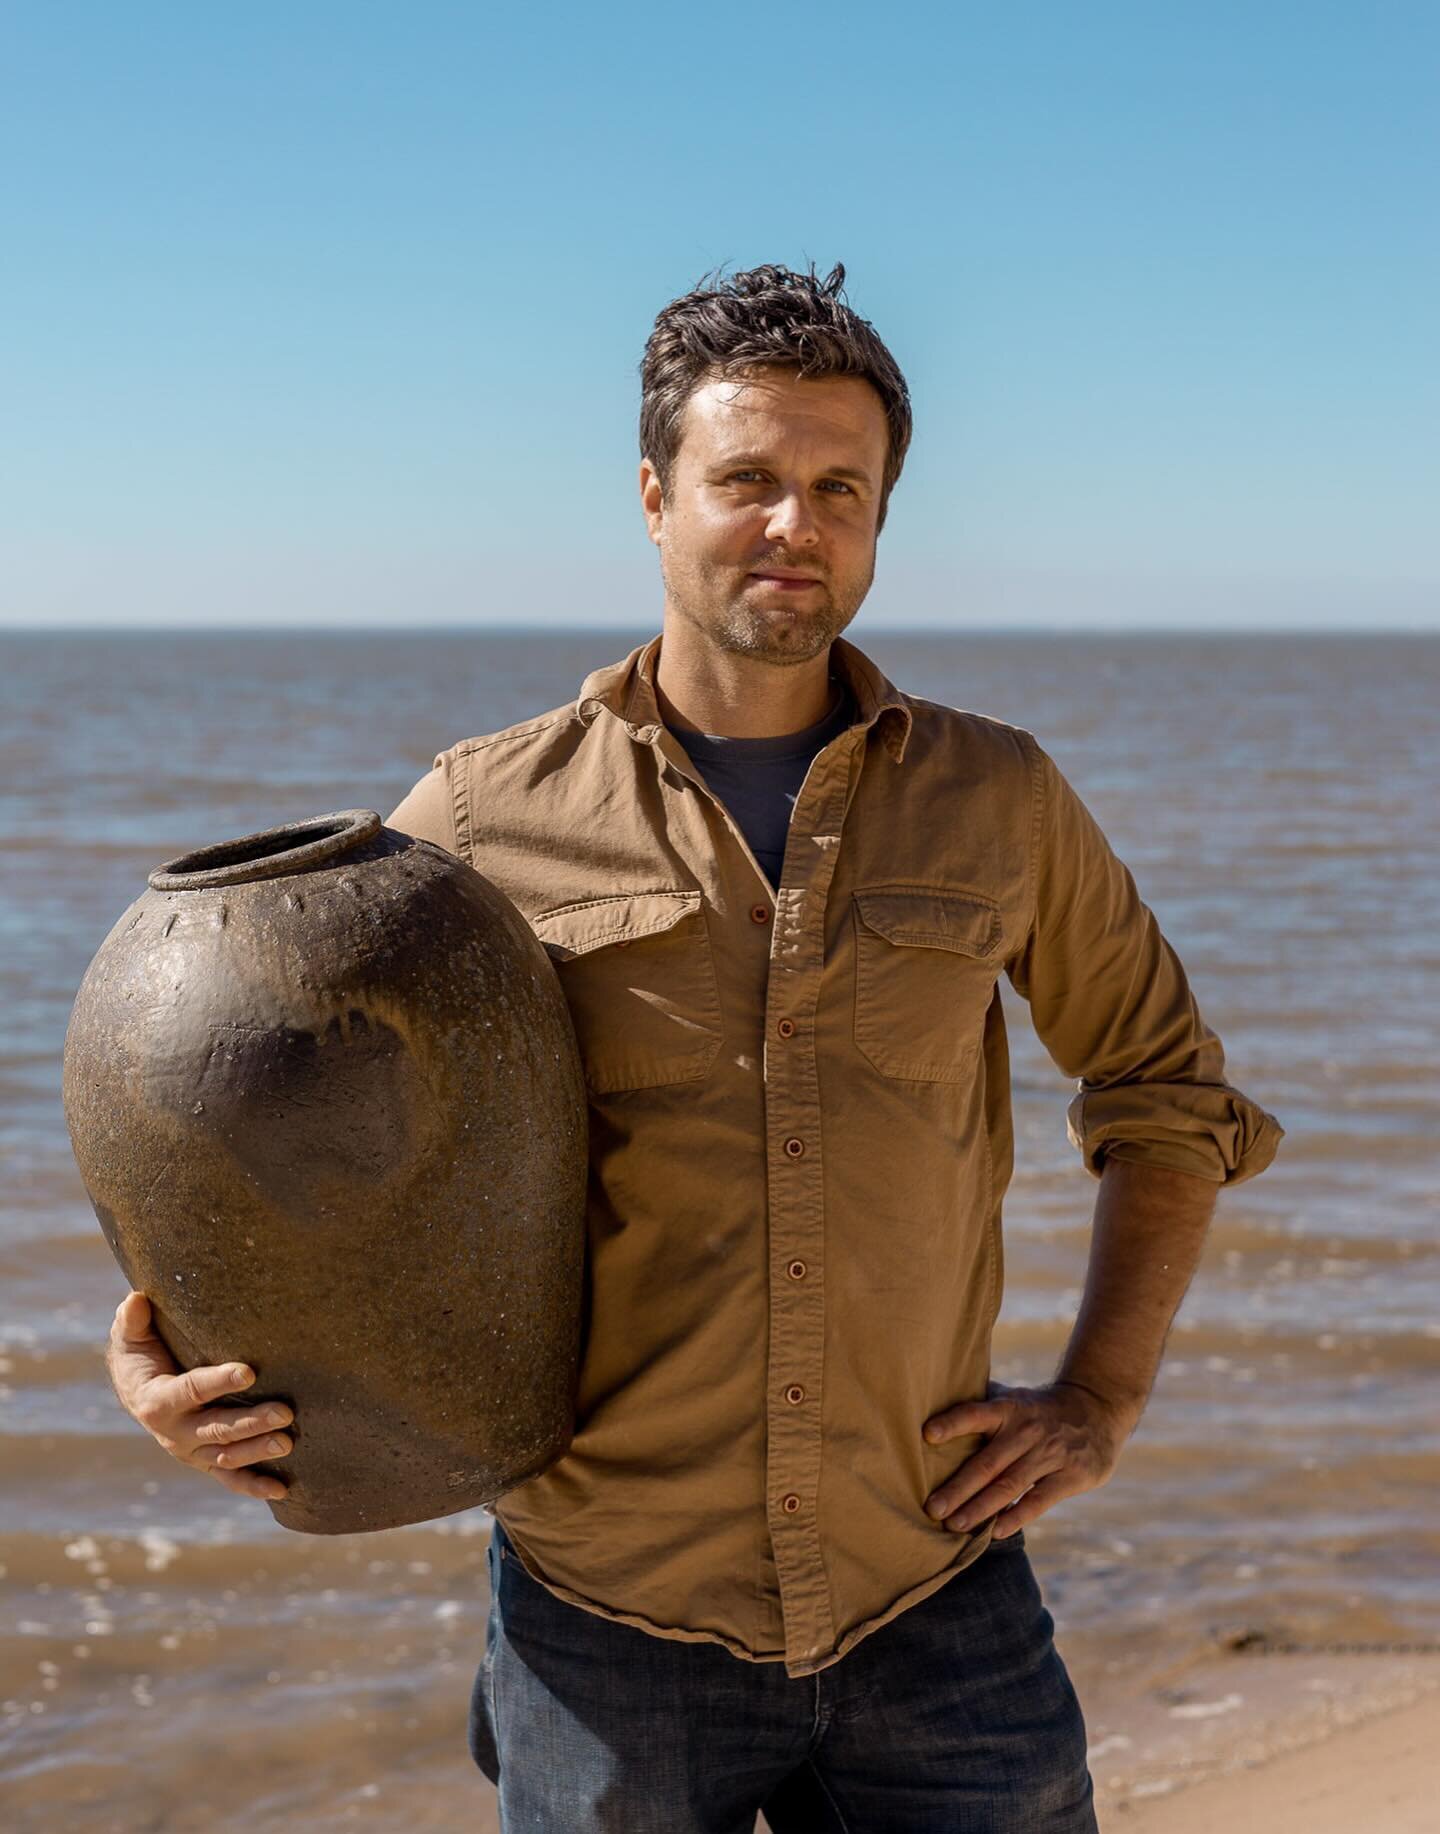 In February, I got to shoot for the @mobilebaykeeper magazine, Currents, a story about the forever talented and knowledgeable @zachsierkepottery and the natural clay deposits that are found along Mobile Bay. It was such an enjoyable and educational d